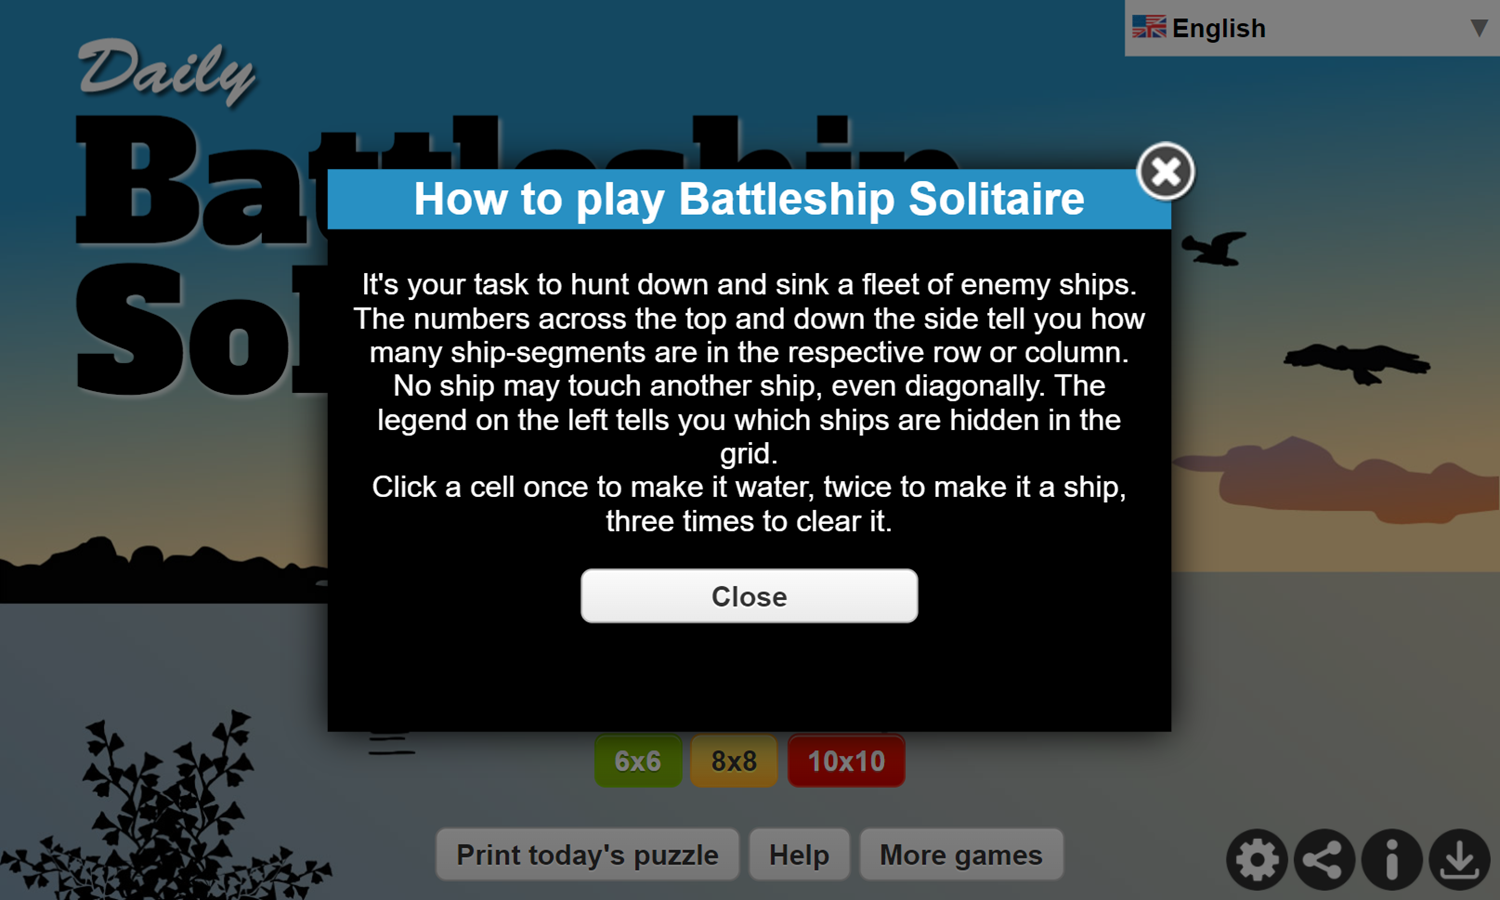 Daily Battleship Solitaire Game How To Play Screenshot.